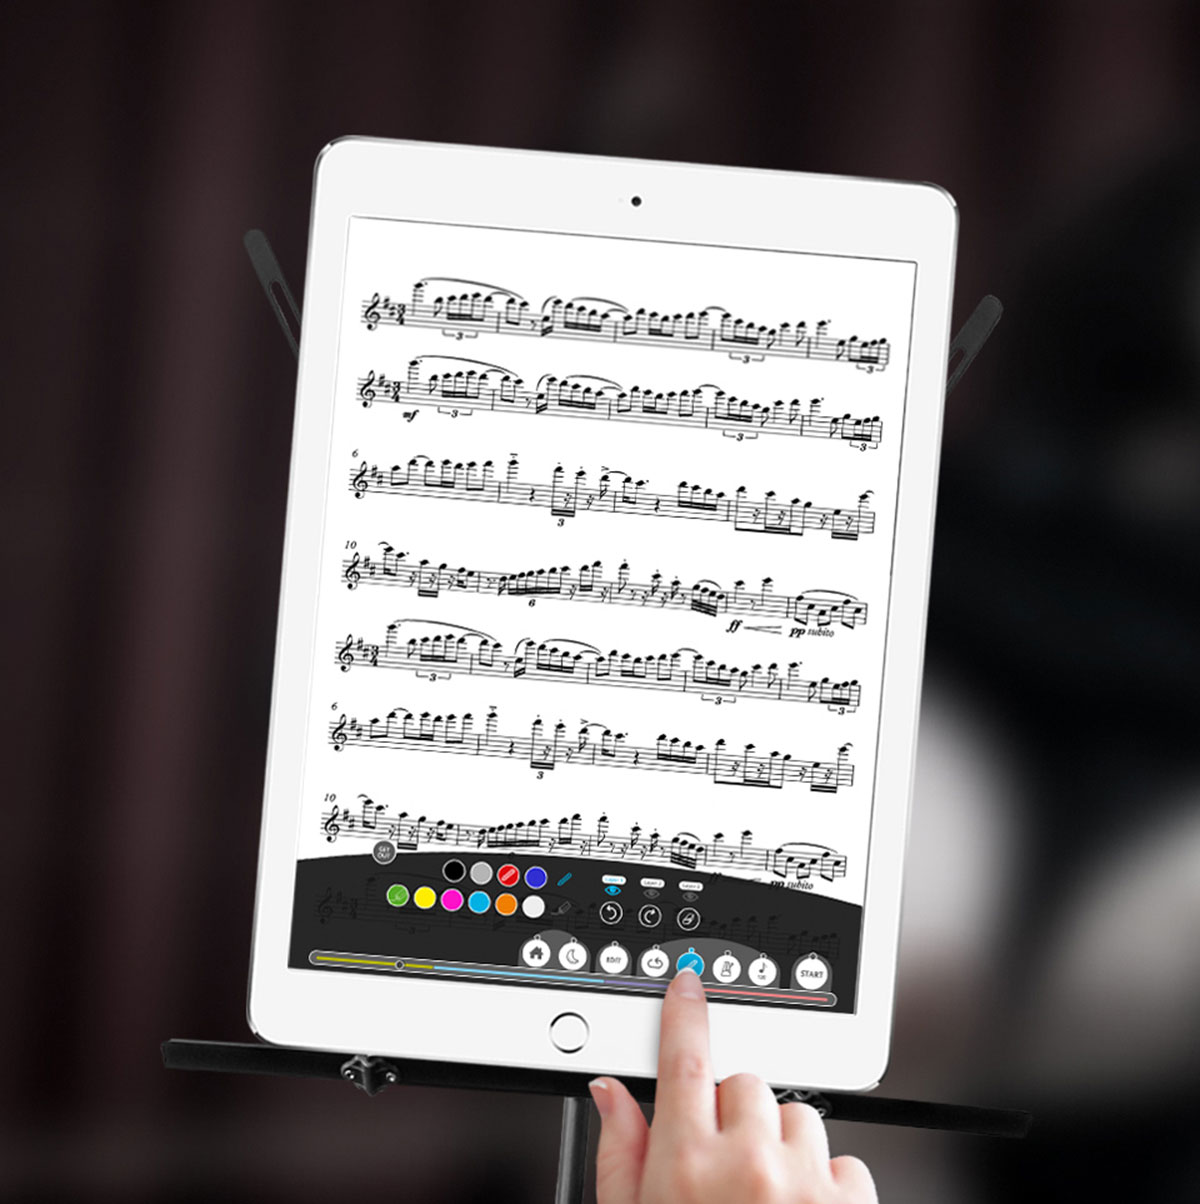 The International Journal of Music Has Come to a Partnership With BlackBinder, the New Intelligent App to Read Music While Playing